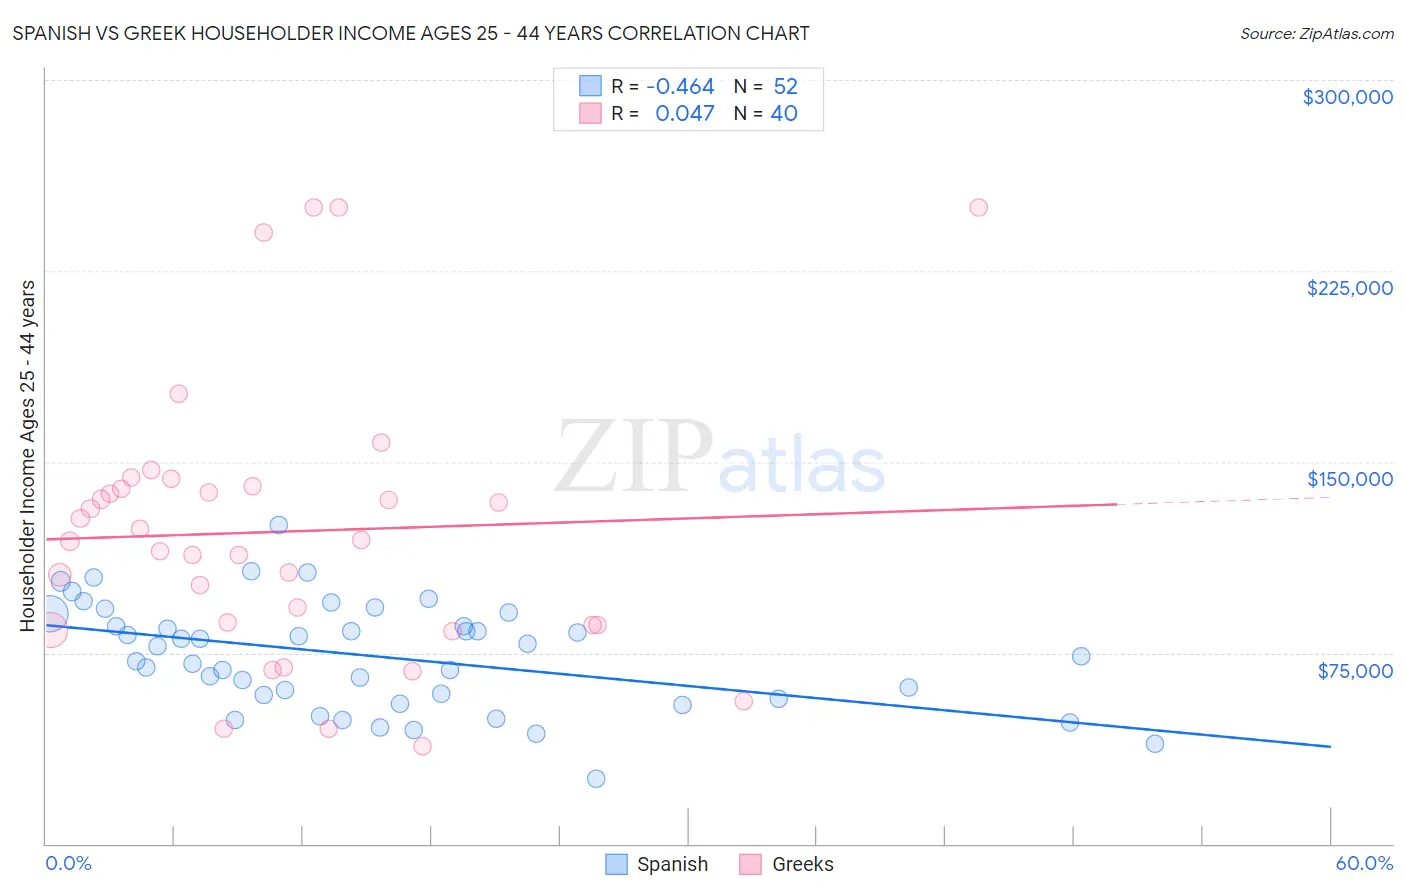 Spanish vs Greek Householder Income Ages 25 - 44 years